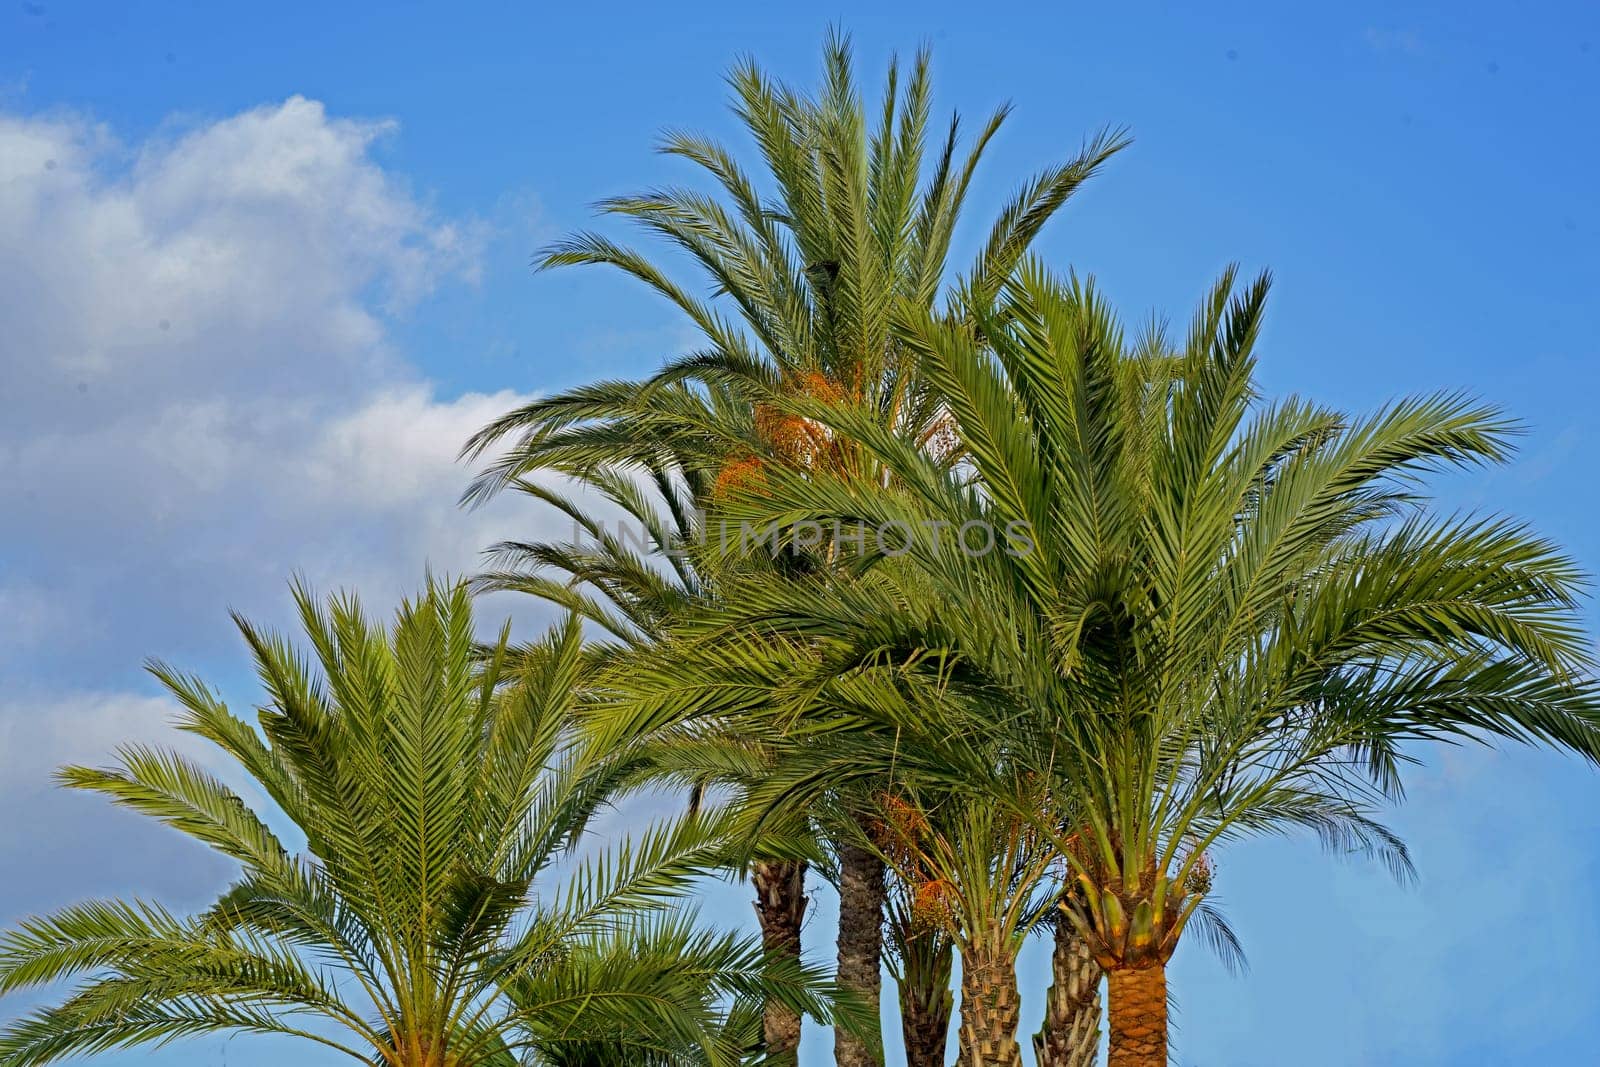 date palms against the blue sky. Summer seascape. horizontal photo by aprilphoto